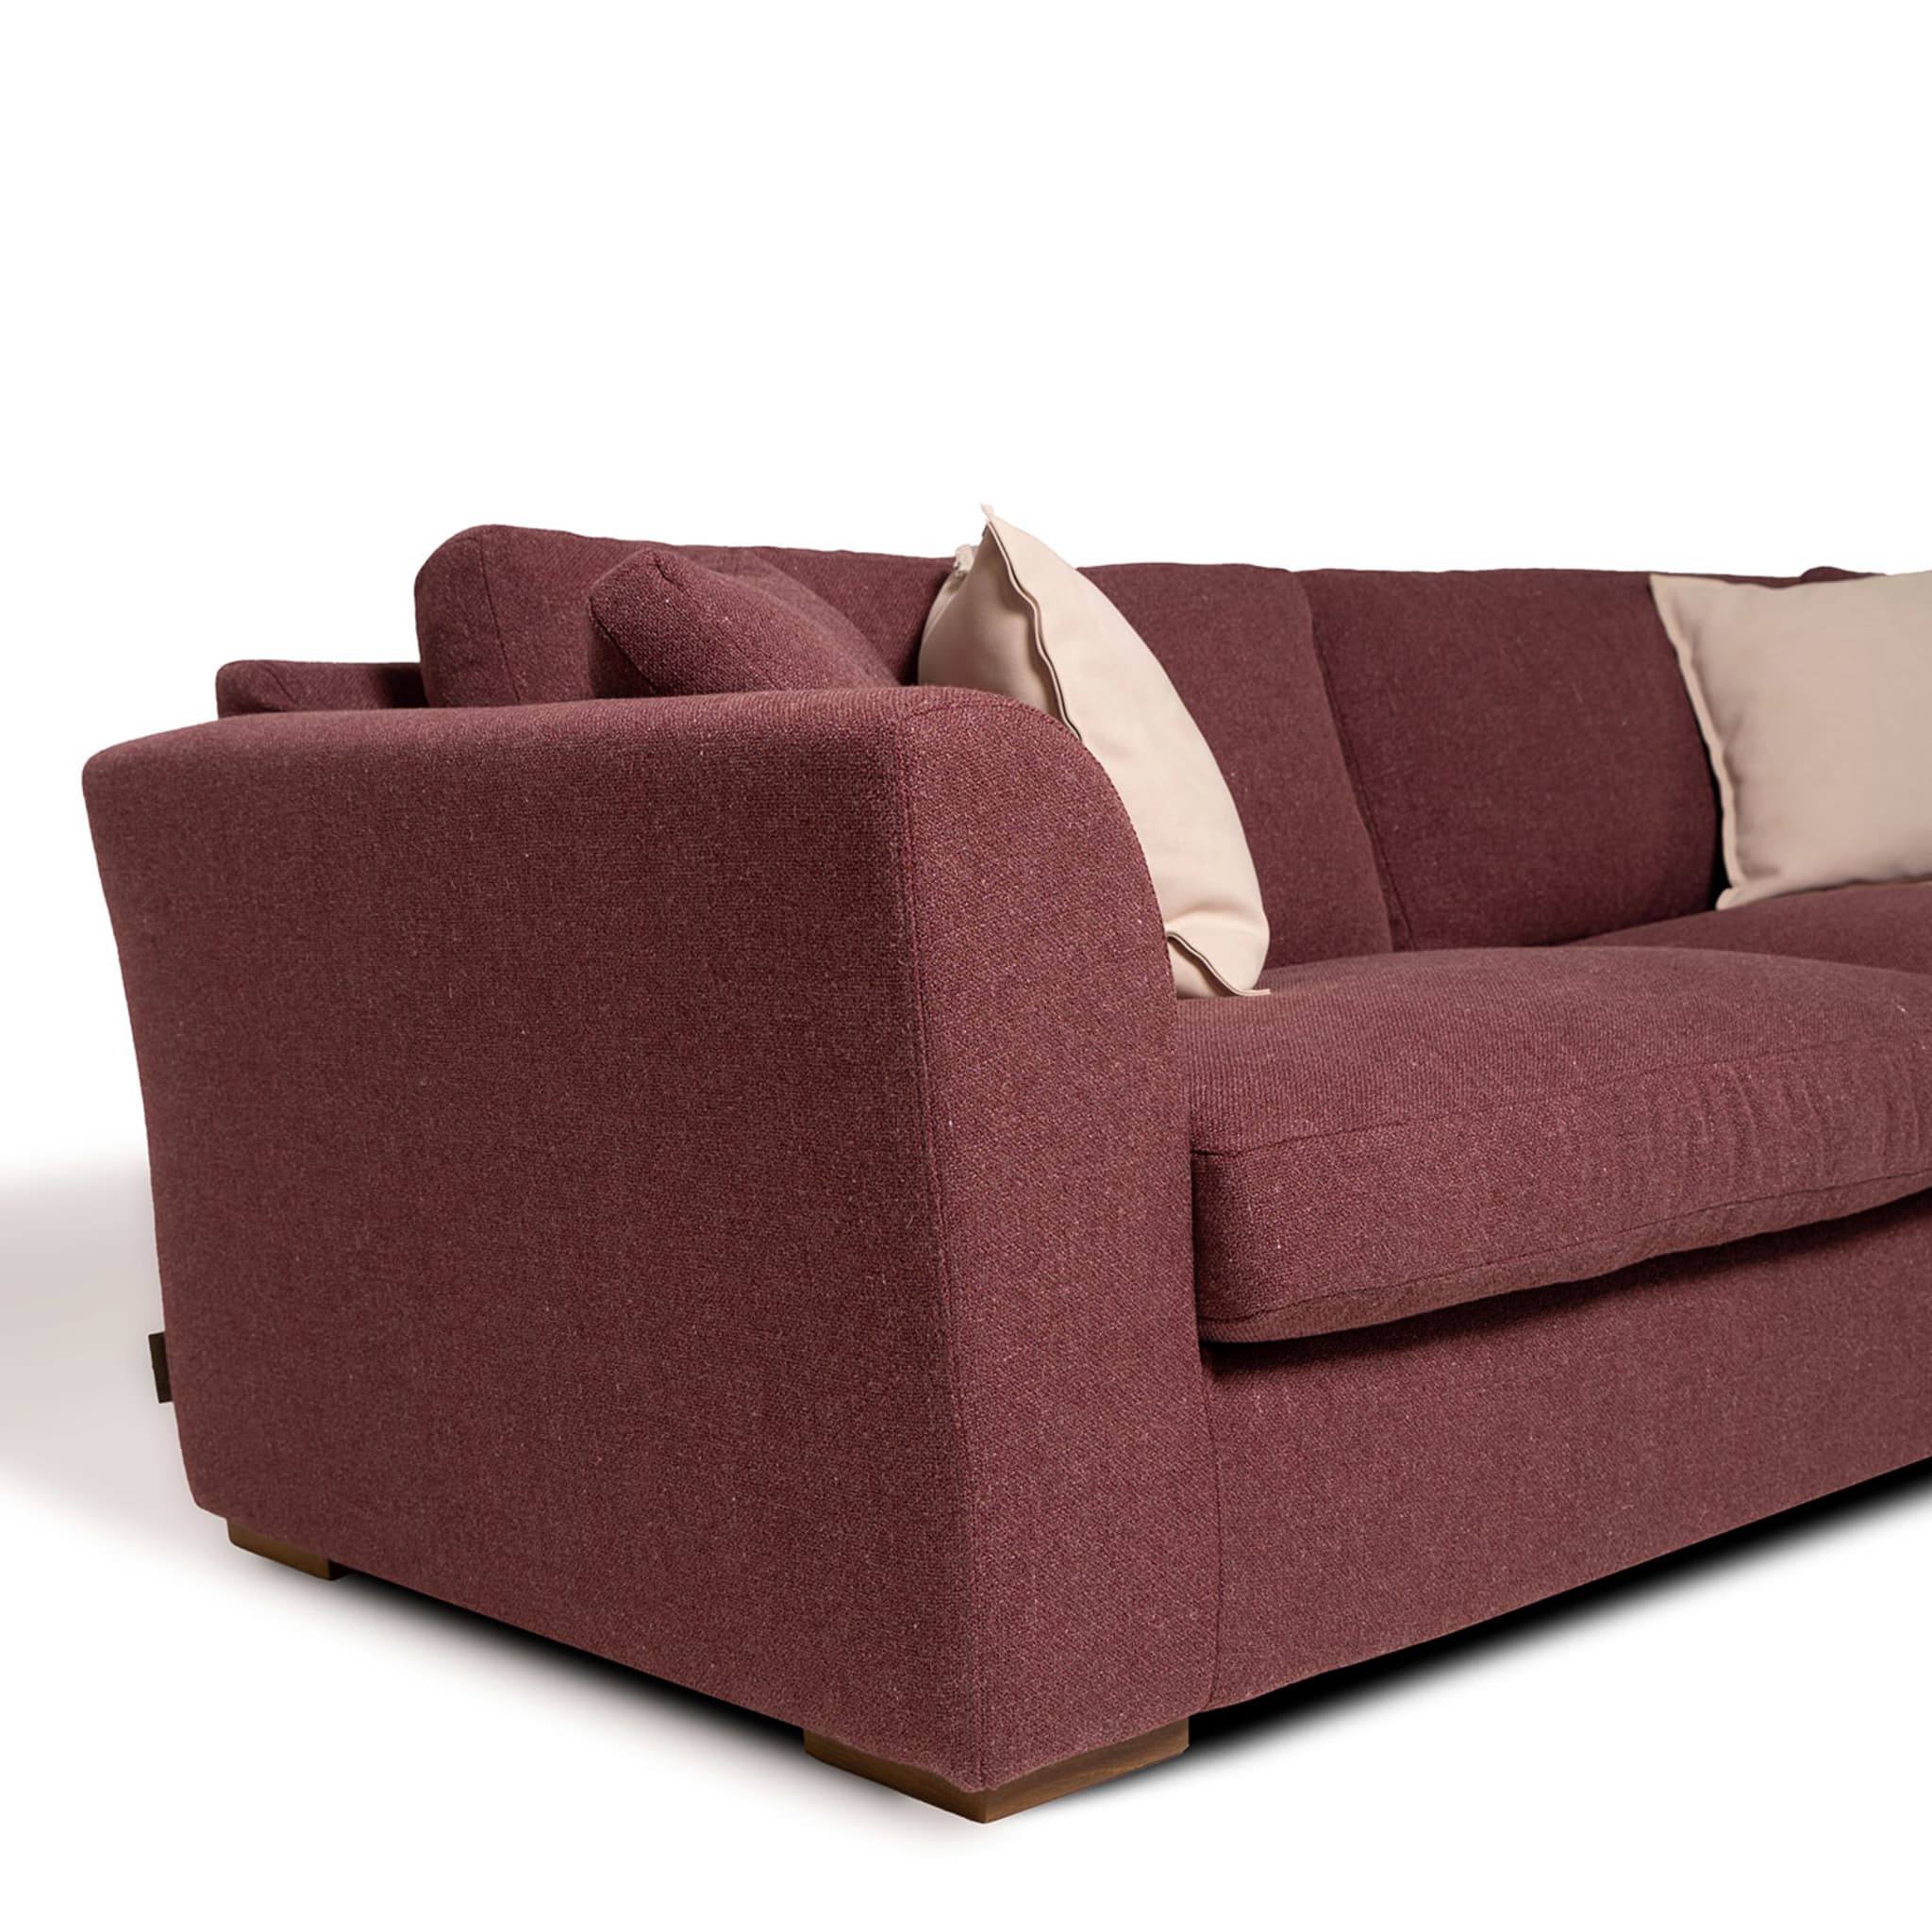 Sandy Sofa 3 Seater by Marco and Giulio Mantellassi - Alternative view 2